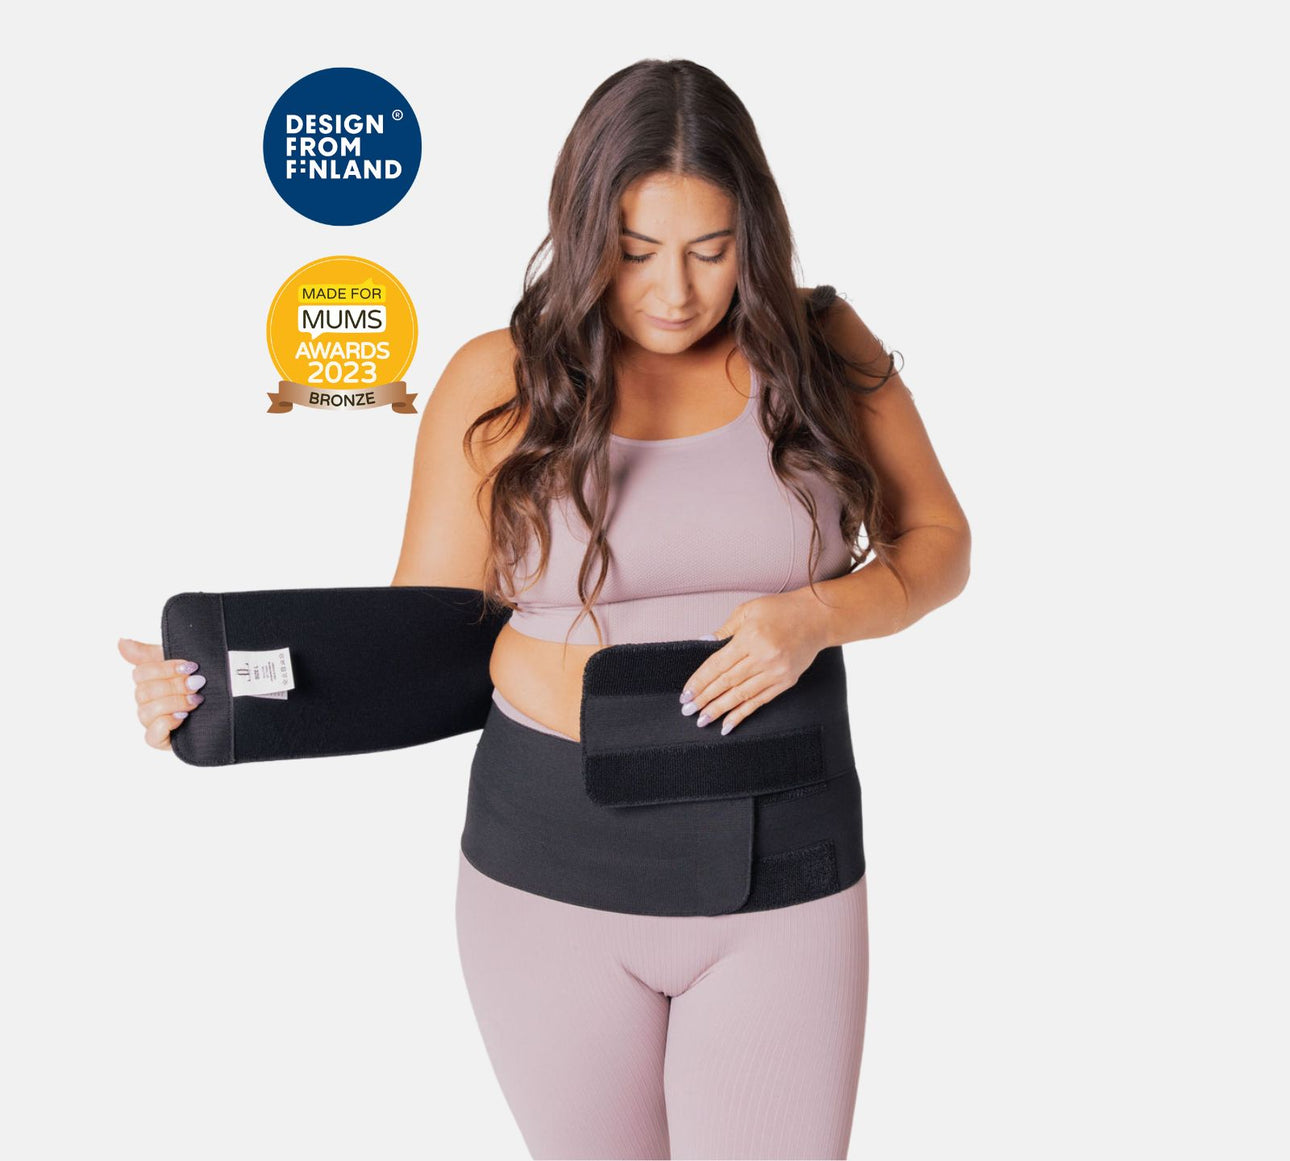 Pregnancy Back Support Belt  Supports Child Weight & Relieve Back